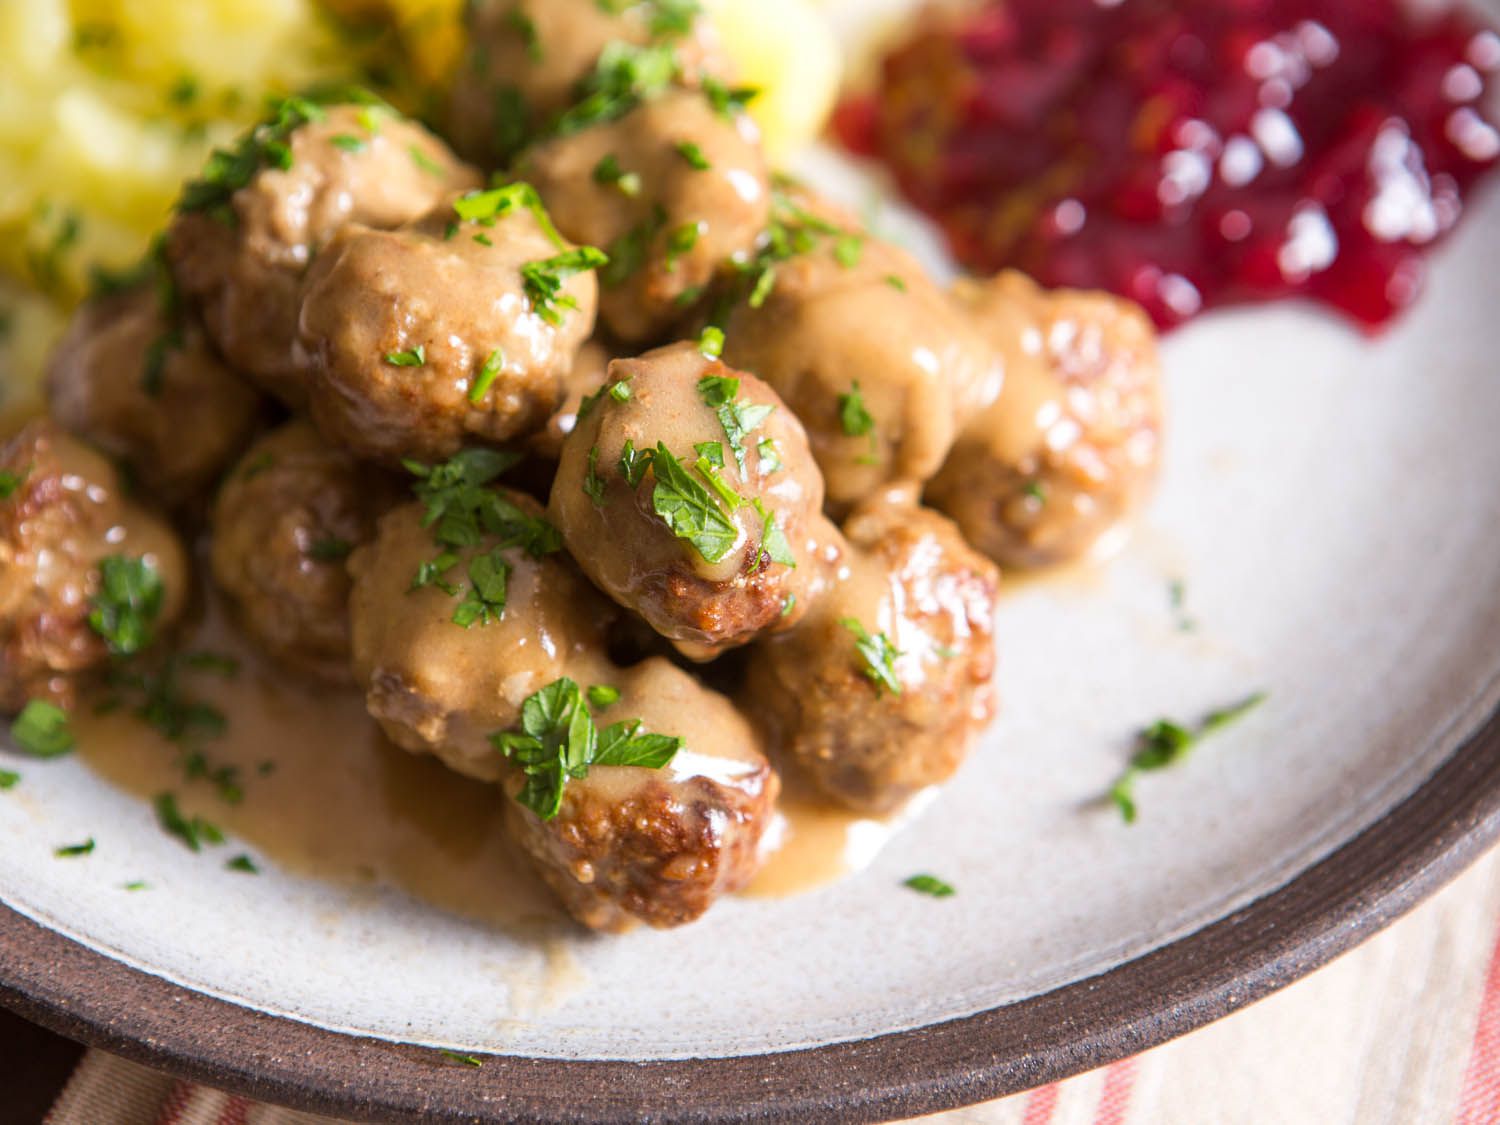 A plate with gravy-covered Swedish meatballs.